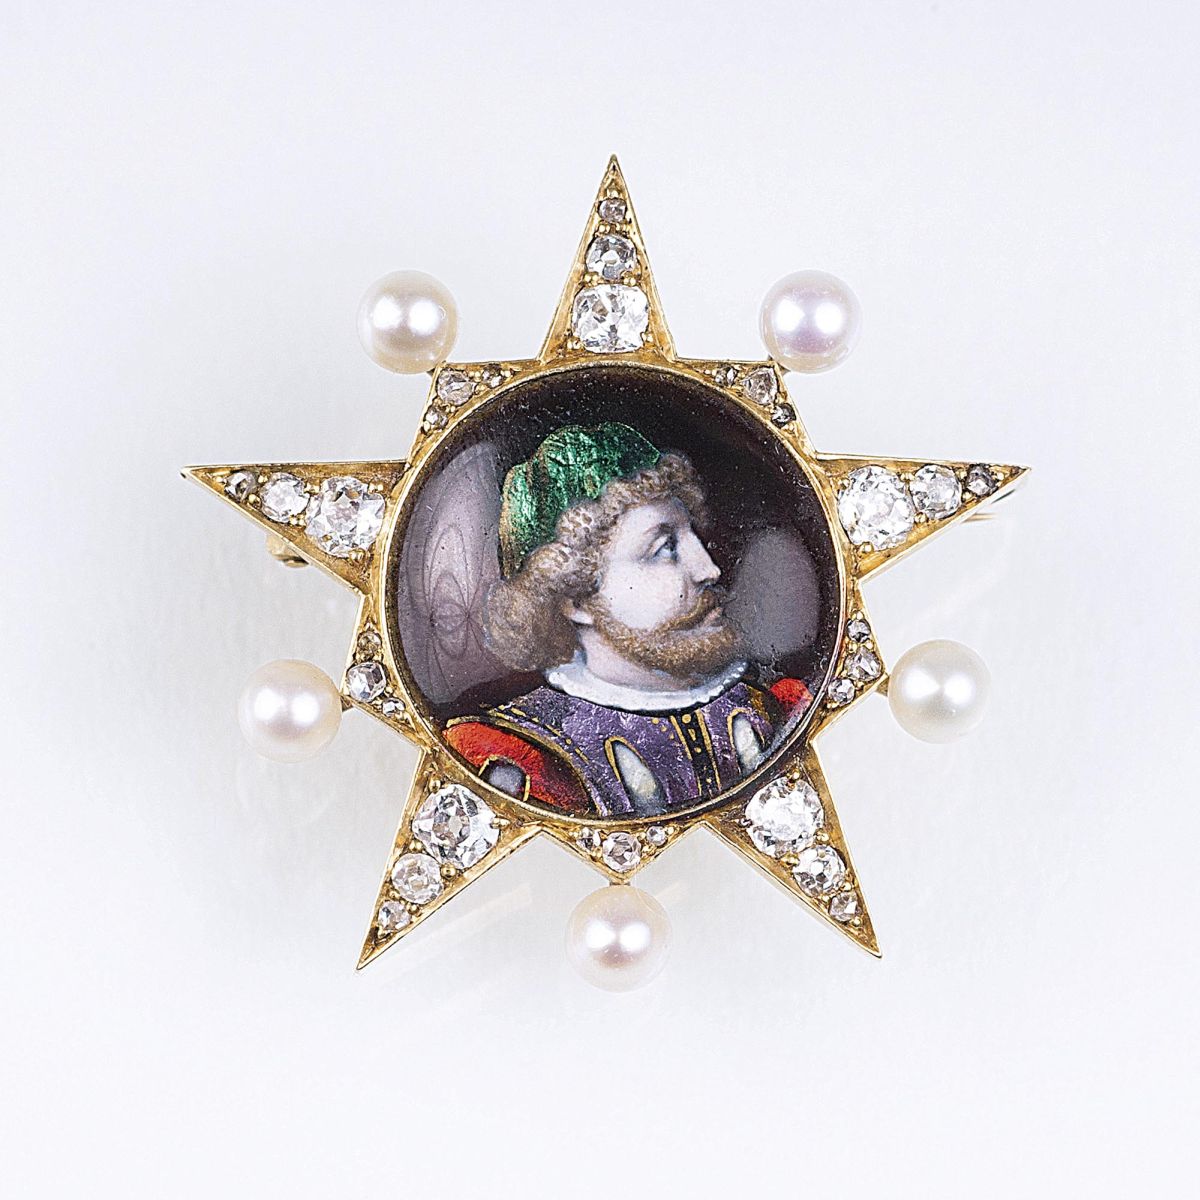 A Pearl Diamond Brooch with a Portrait in Renaissance style